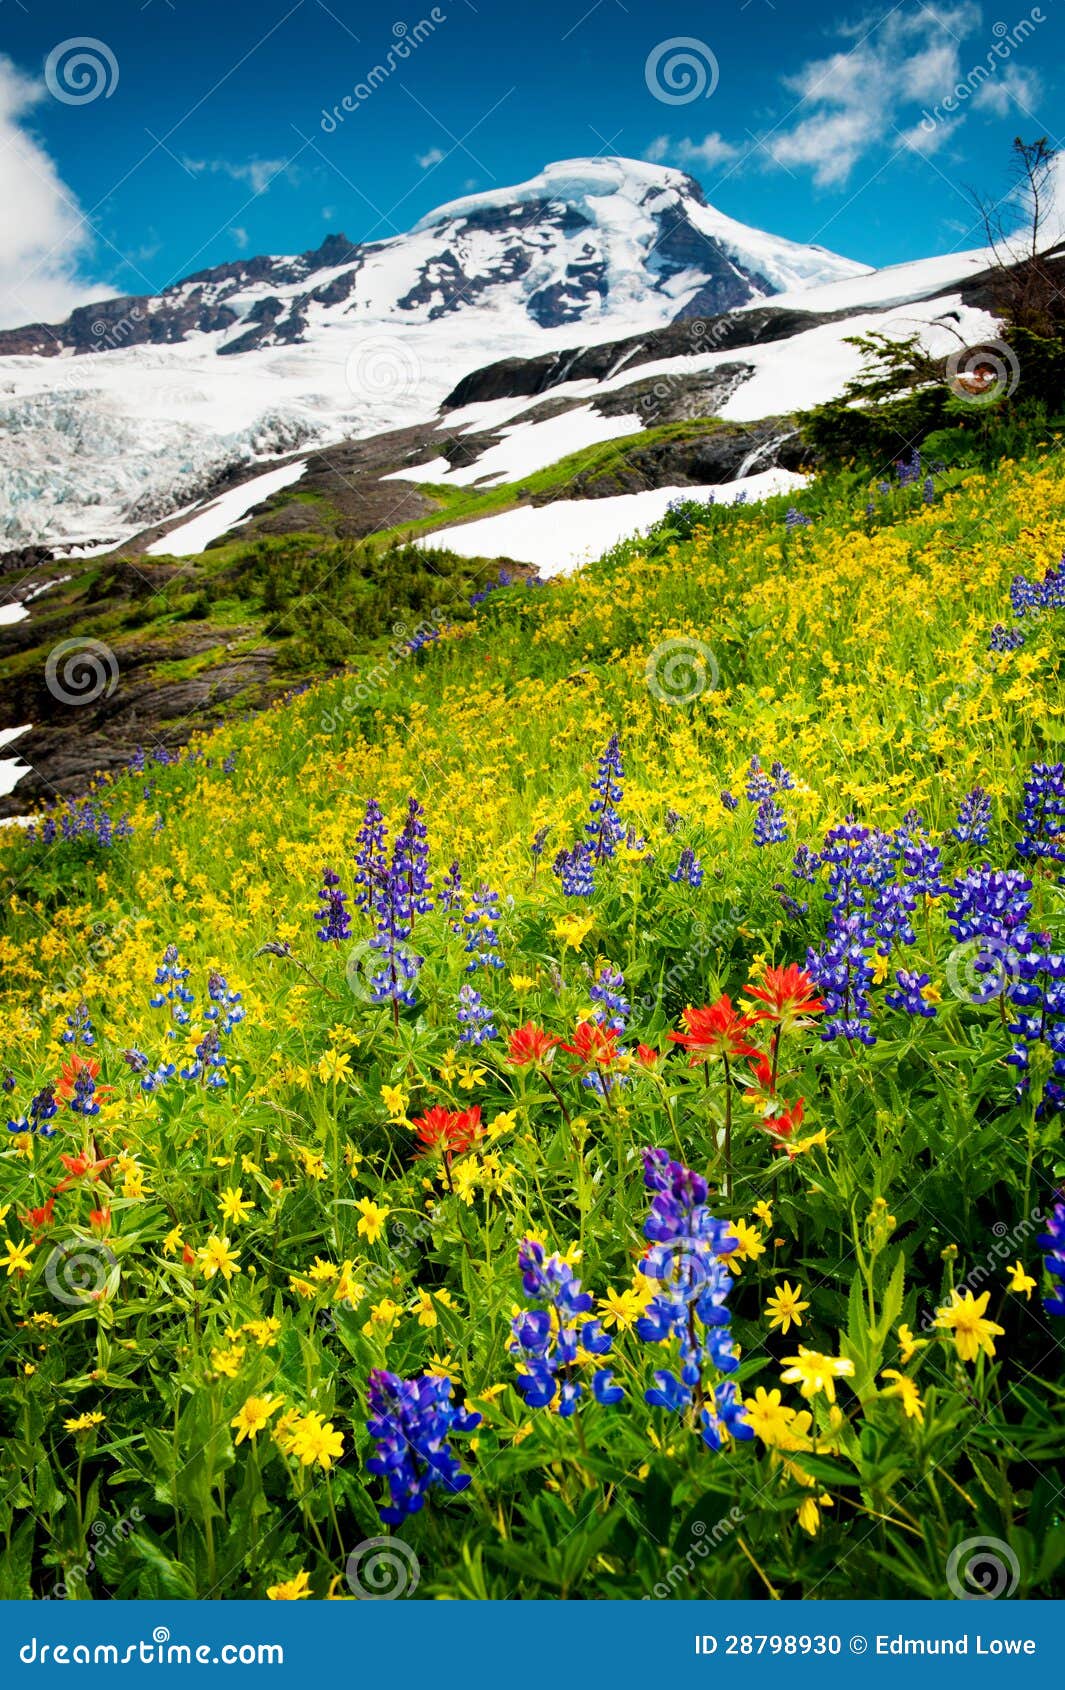 mt. baker and wildflowers